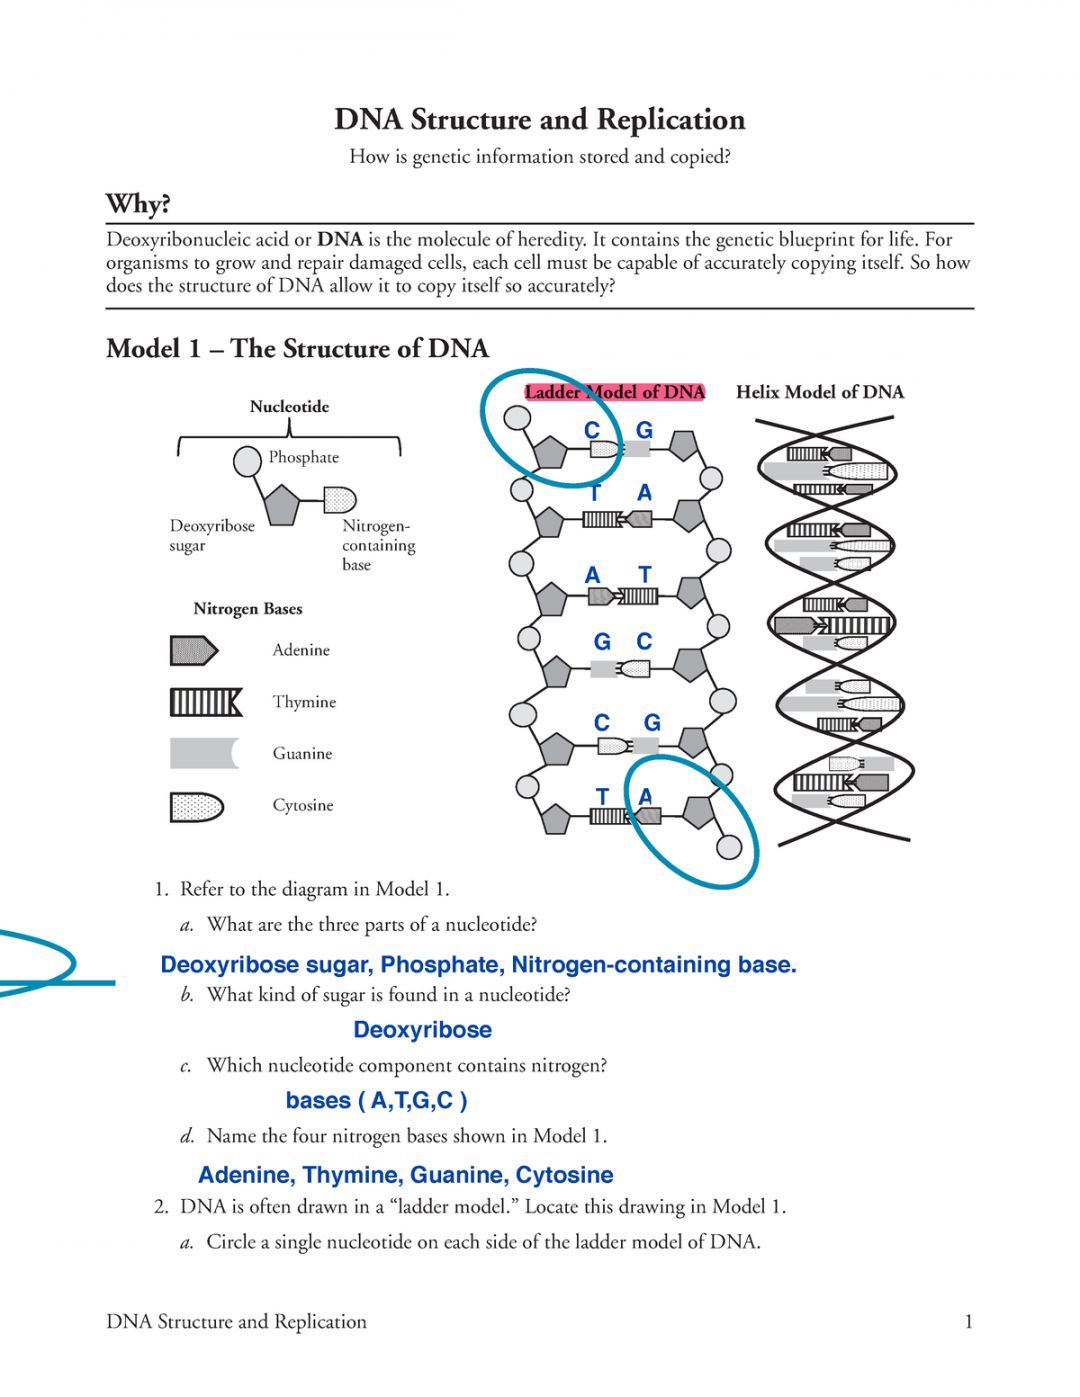 DNA Structure and Replication-S - It contains the genetic